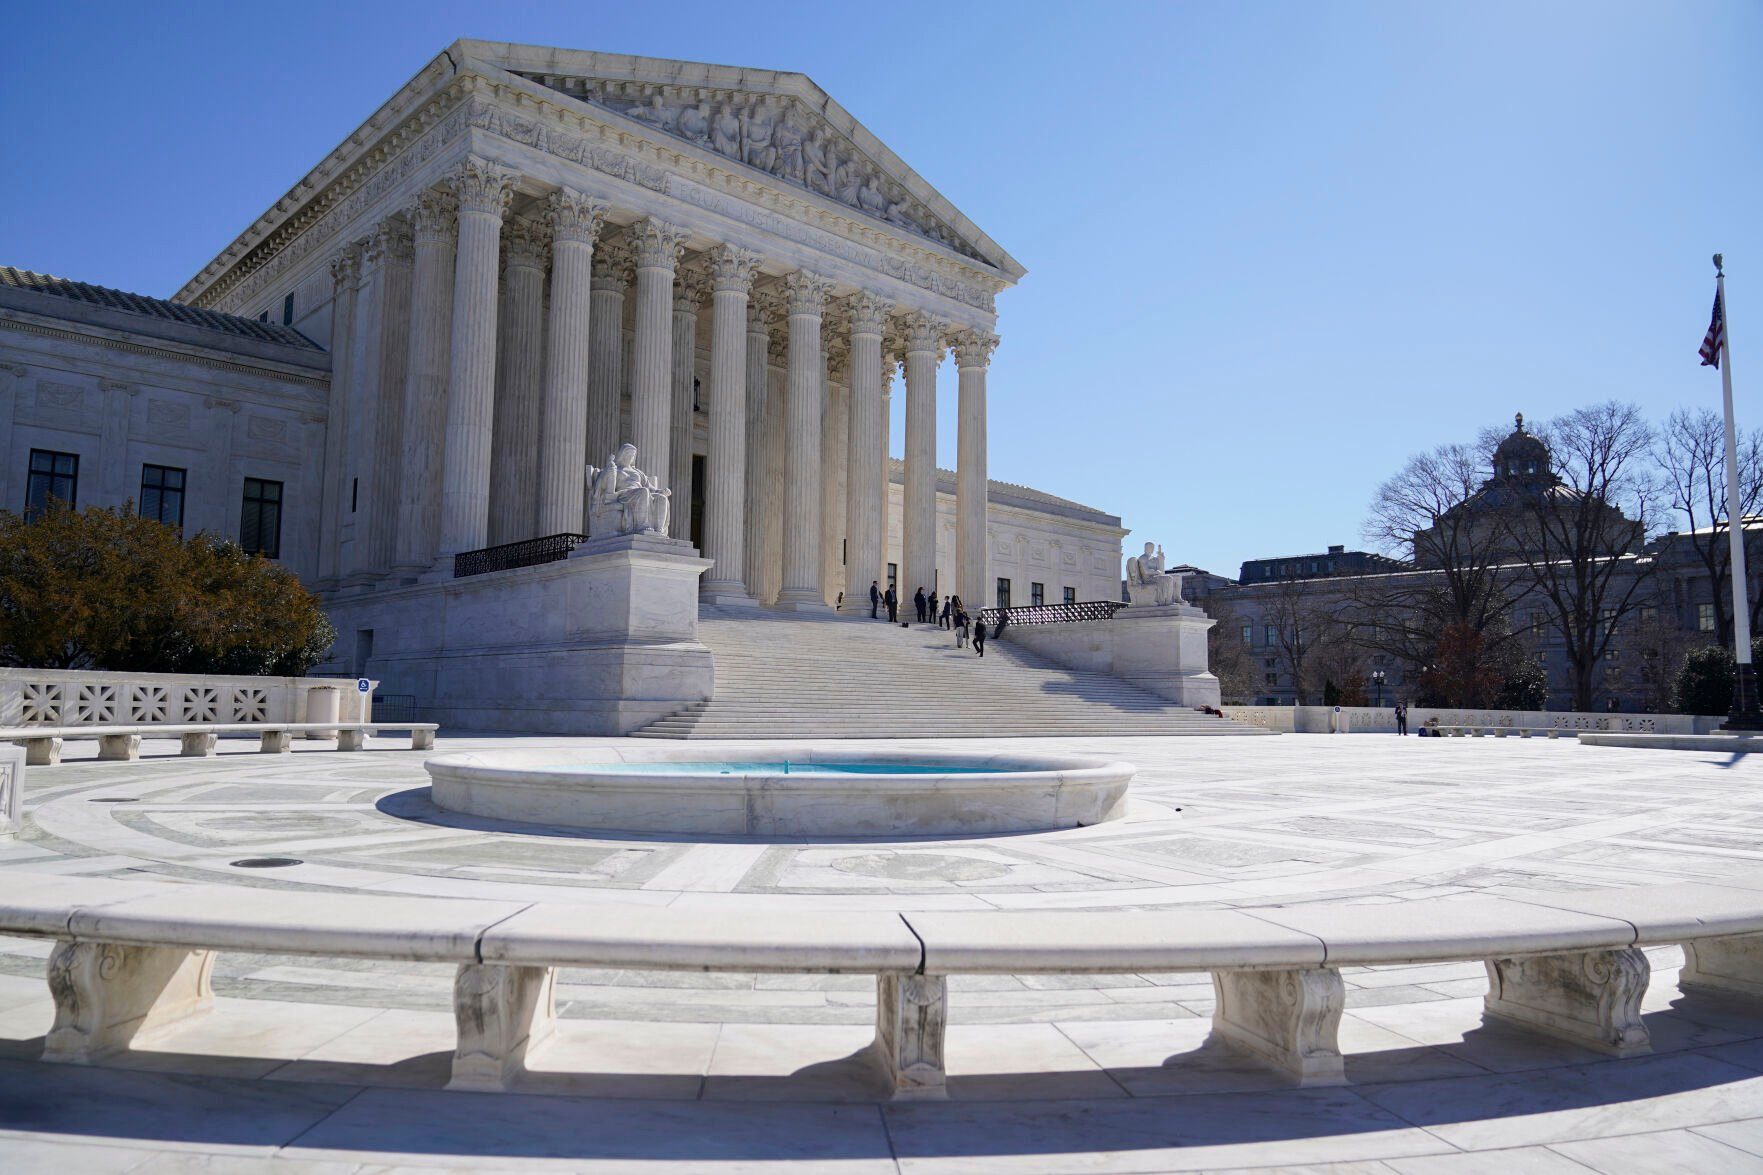 <p>FILE - People stand on the steps of the U.S. Supreme Court, Feb.11, 2022, in Washington. The Supreme Court is taking up challenges by commercial fishermen to a fee requirement that could achieve a long-sought goal of business and conservative interests, limiting a wide range of government regulations. Billions of dollars are potentially at stake. (AP Photo/Mariam Zuhaib, File)</p>   PHOTO CREDIT: Mariam Zuhaib